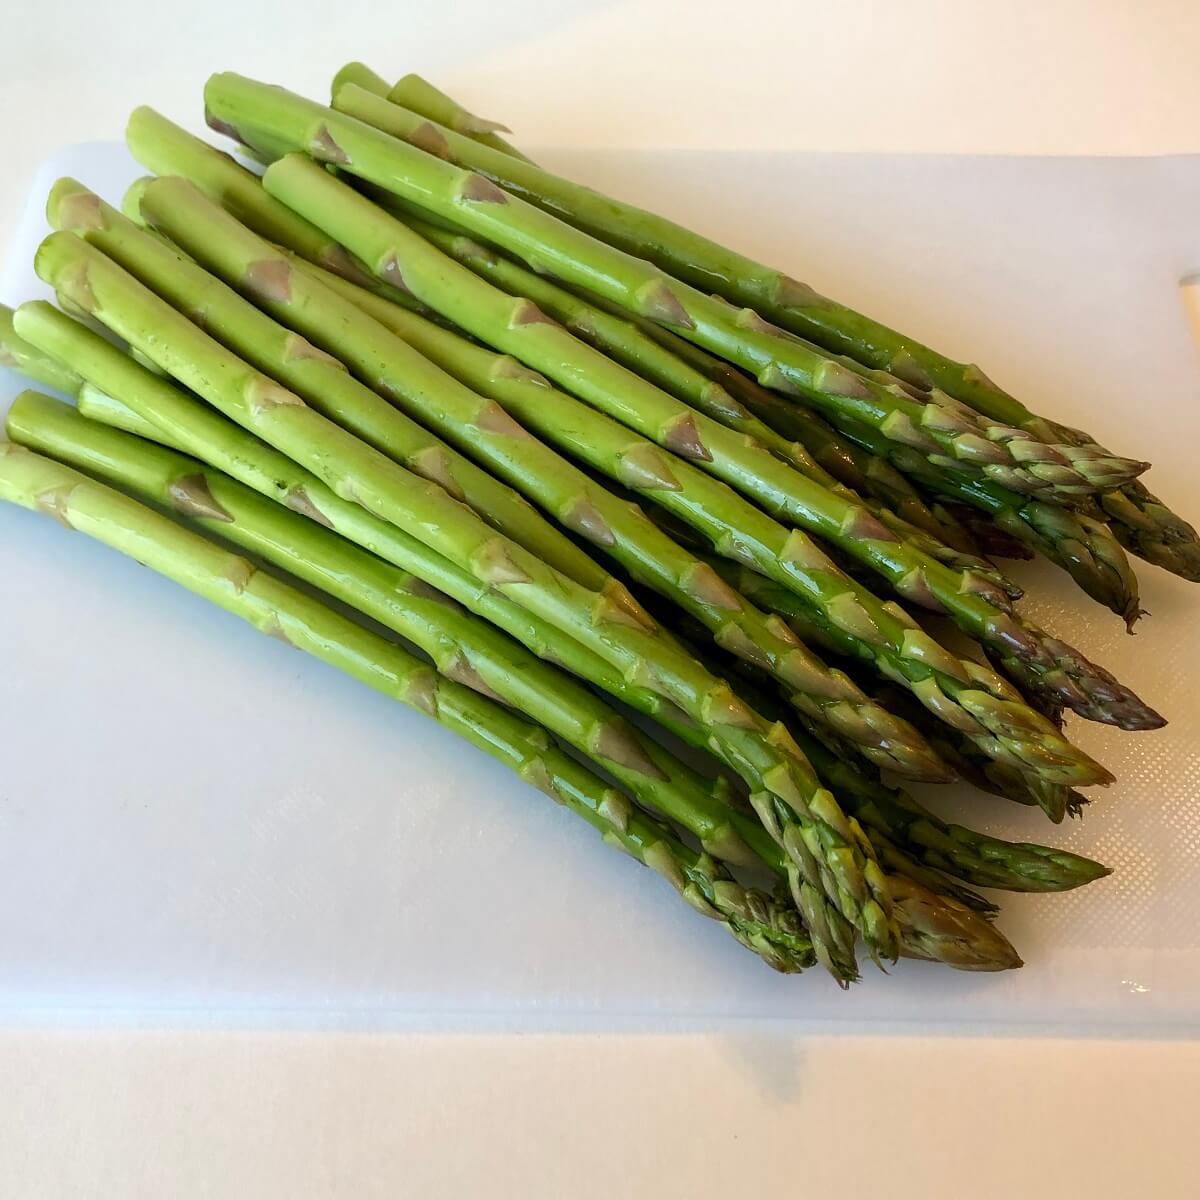 A pile of asparagus spears on a cutting board.